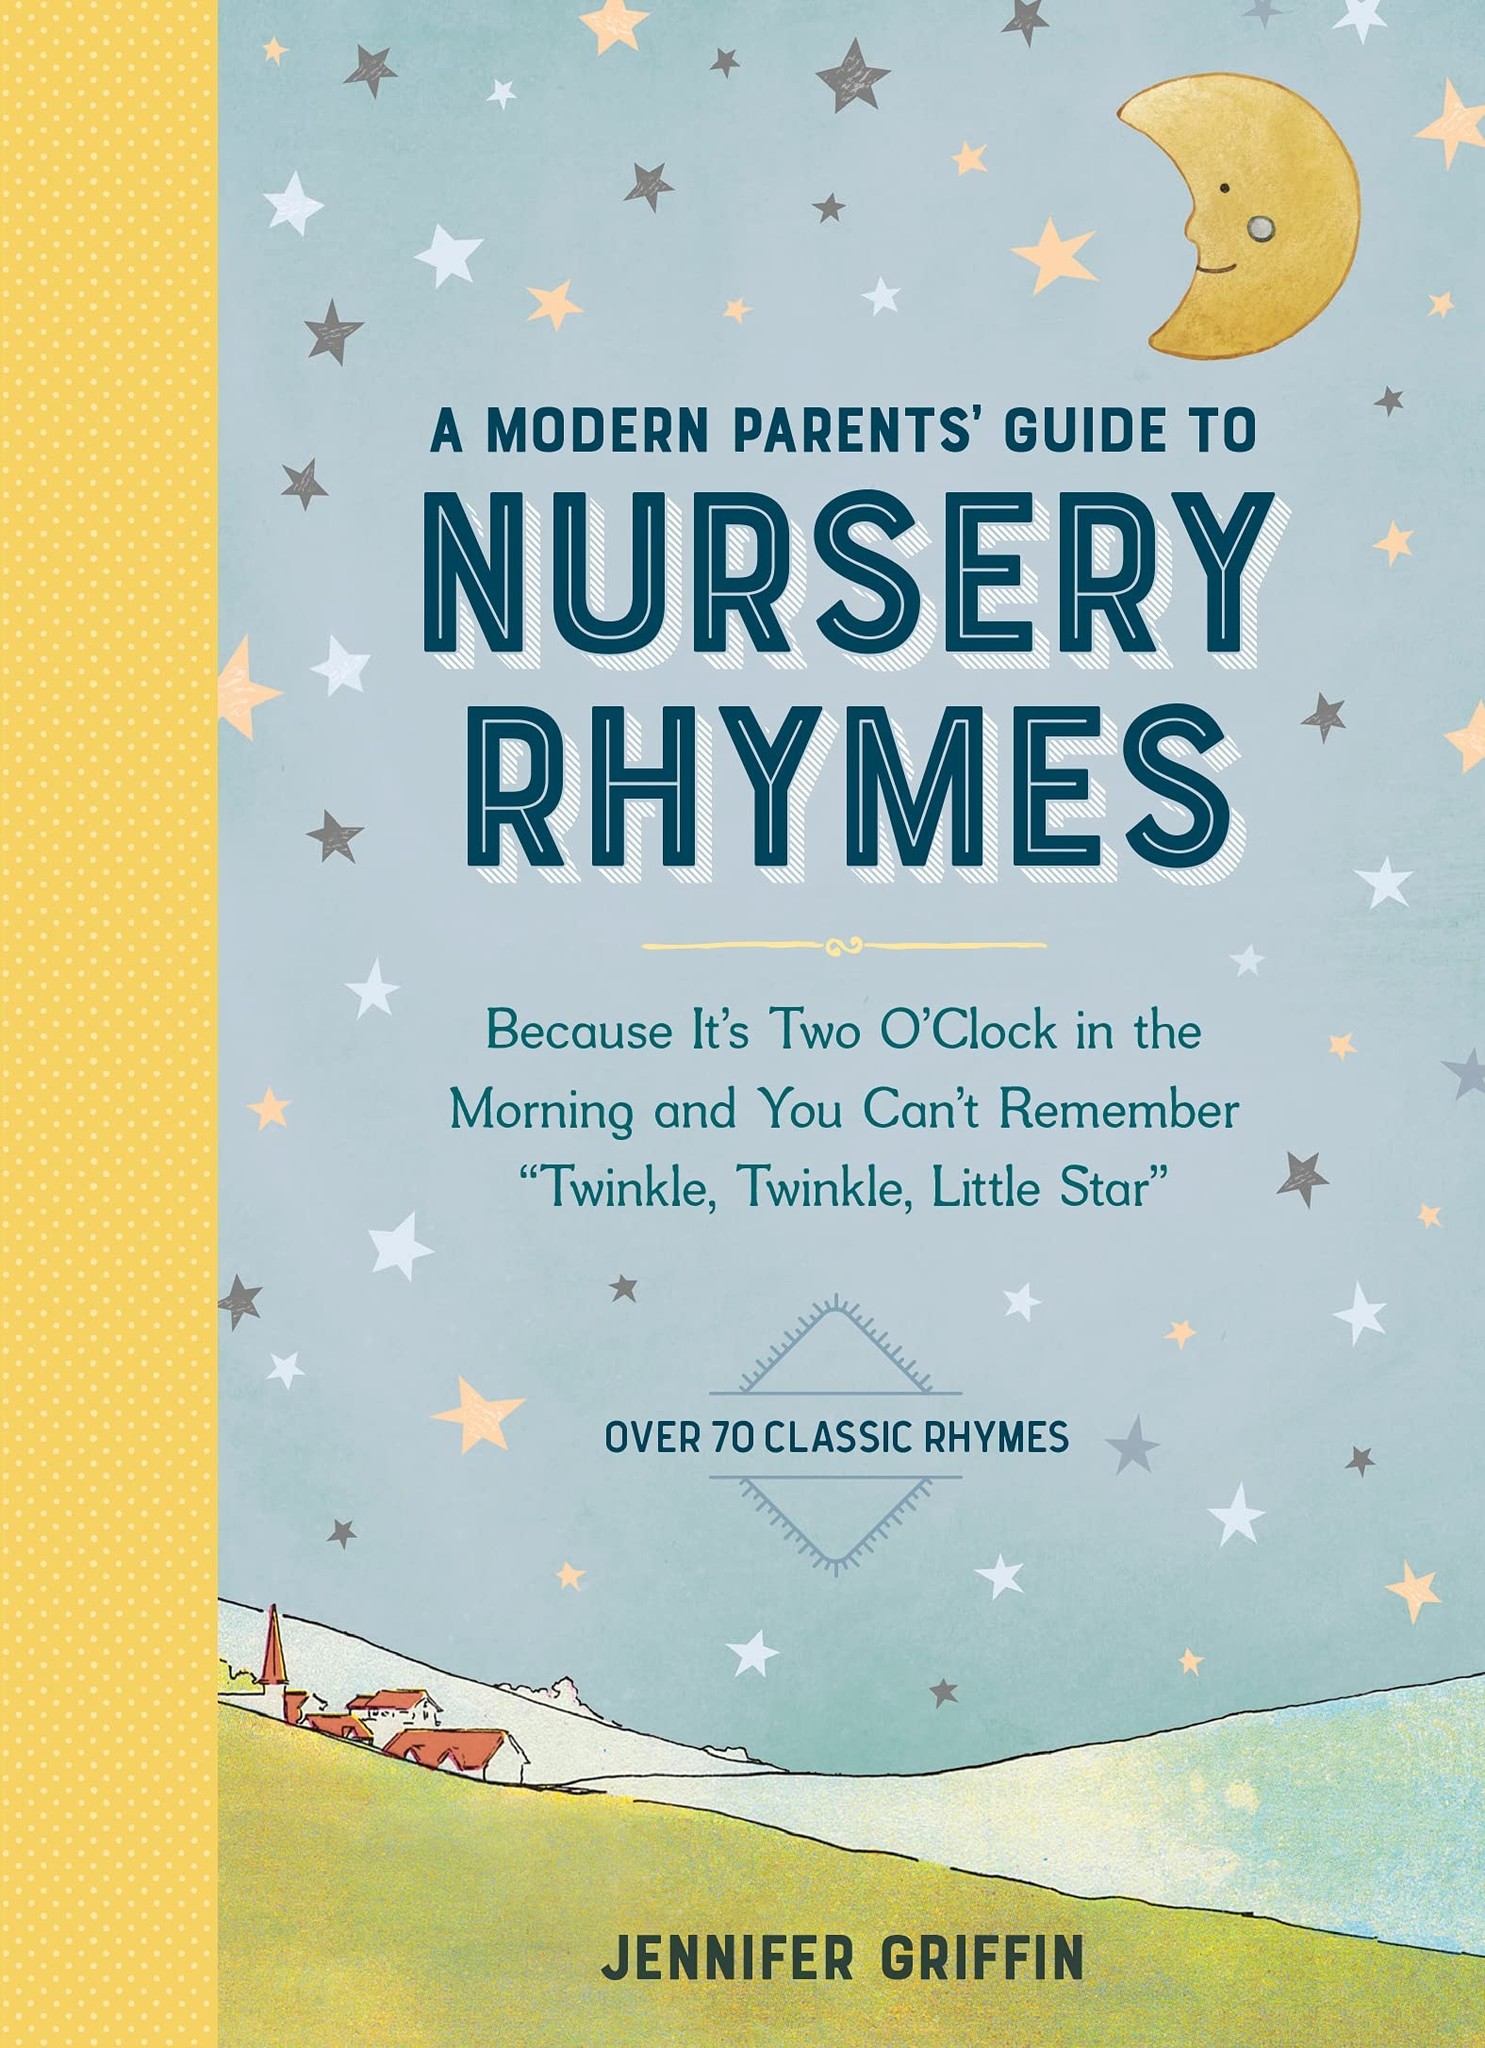 Books A Modern Parents' Guide to Nursery Rhymes book